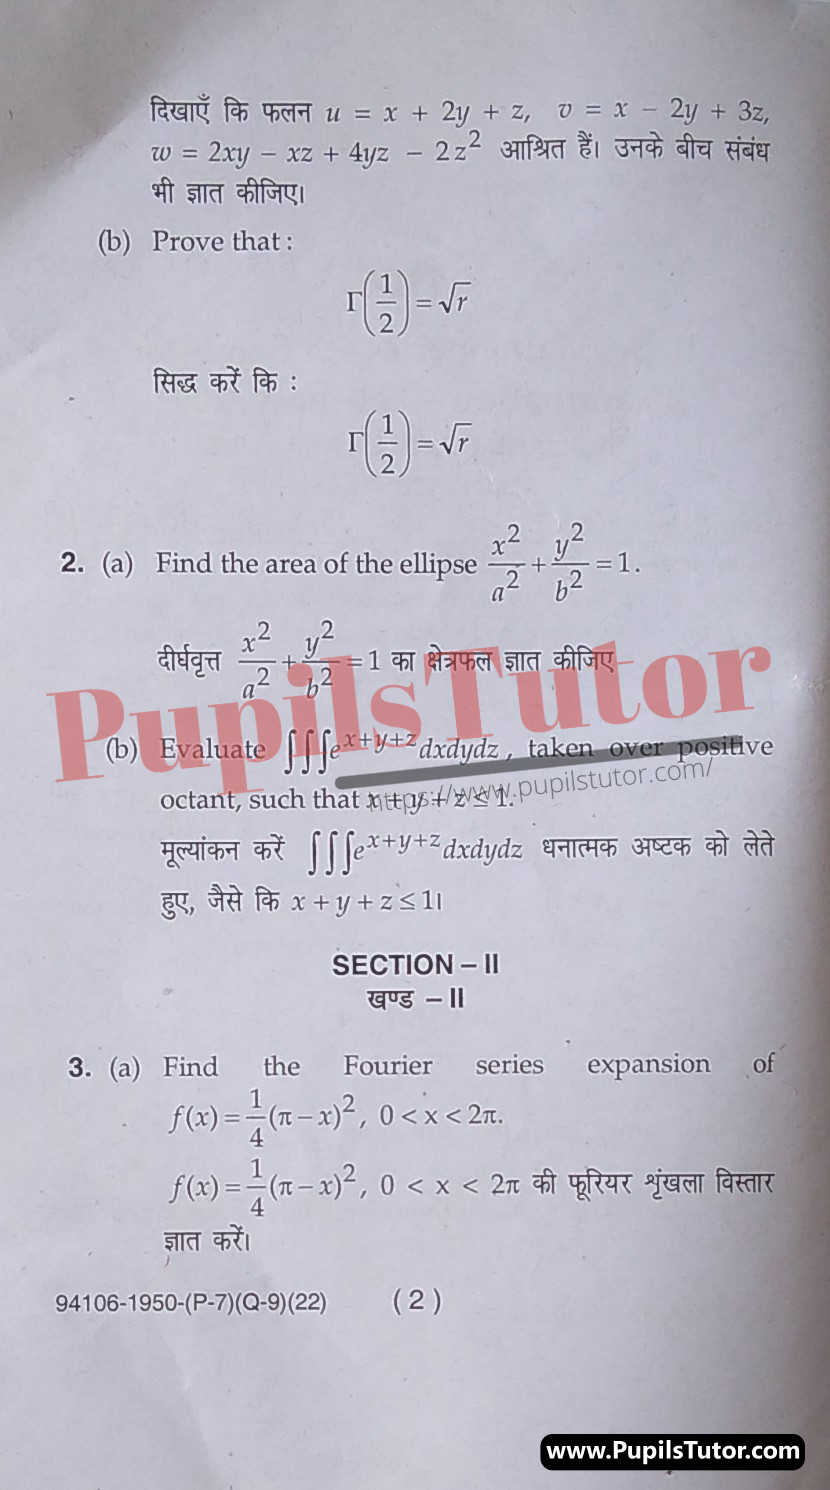 M.D. University B.Sc. [Mathematics] Real And Complex Analysis Sixth Semester Important Question Answer And Solution - www.pupilstutor.com (Paper Page Number 2)